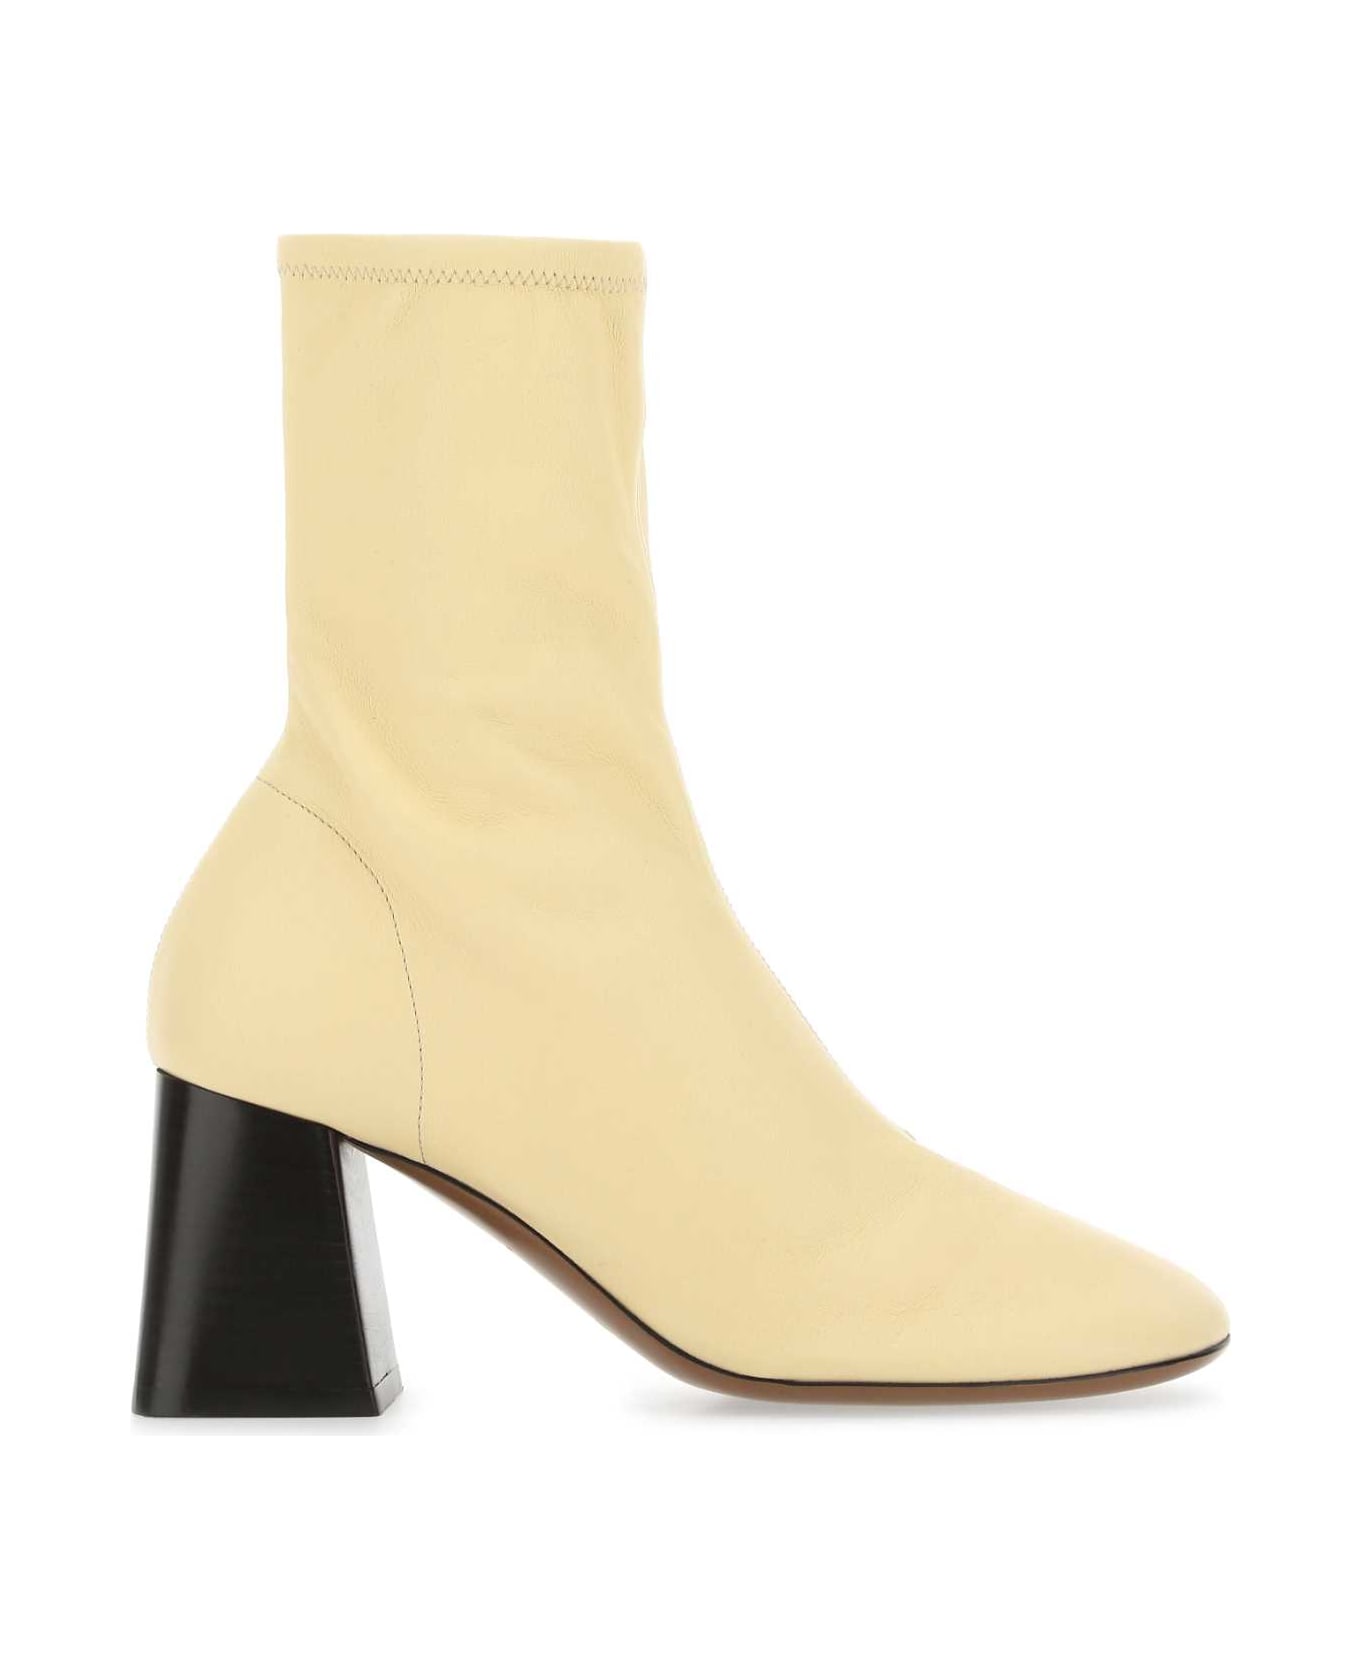 Neous Cream Leather Lepus Ankle Boots - ALABASTER ブーツ